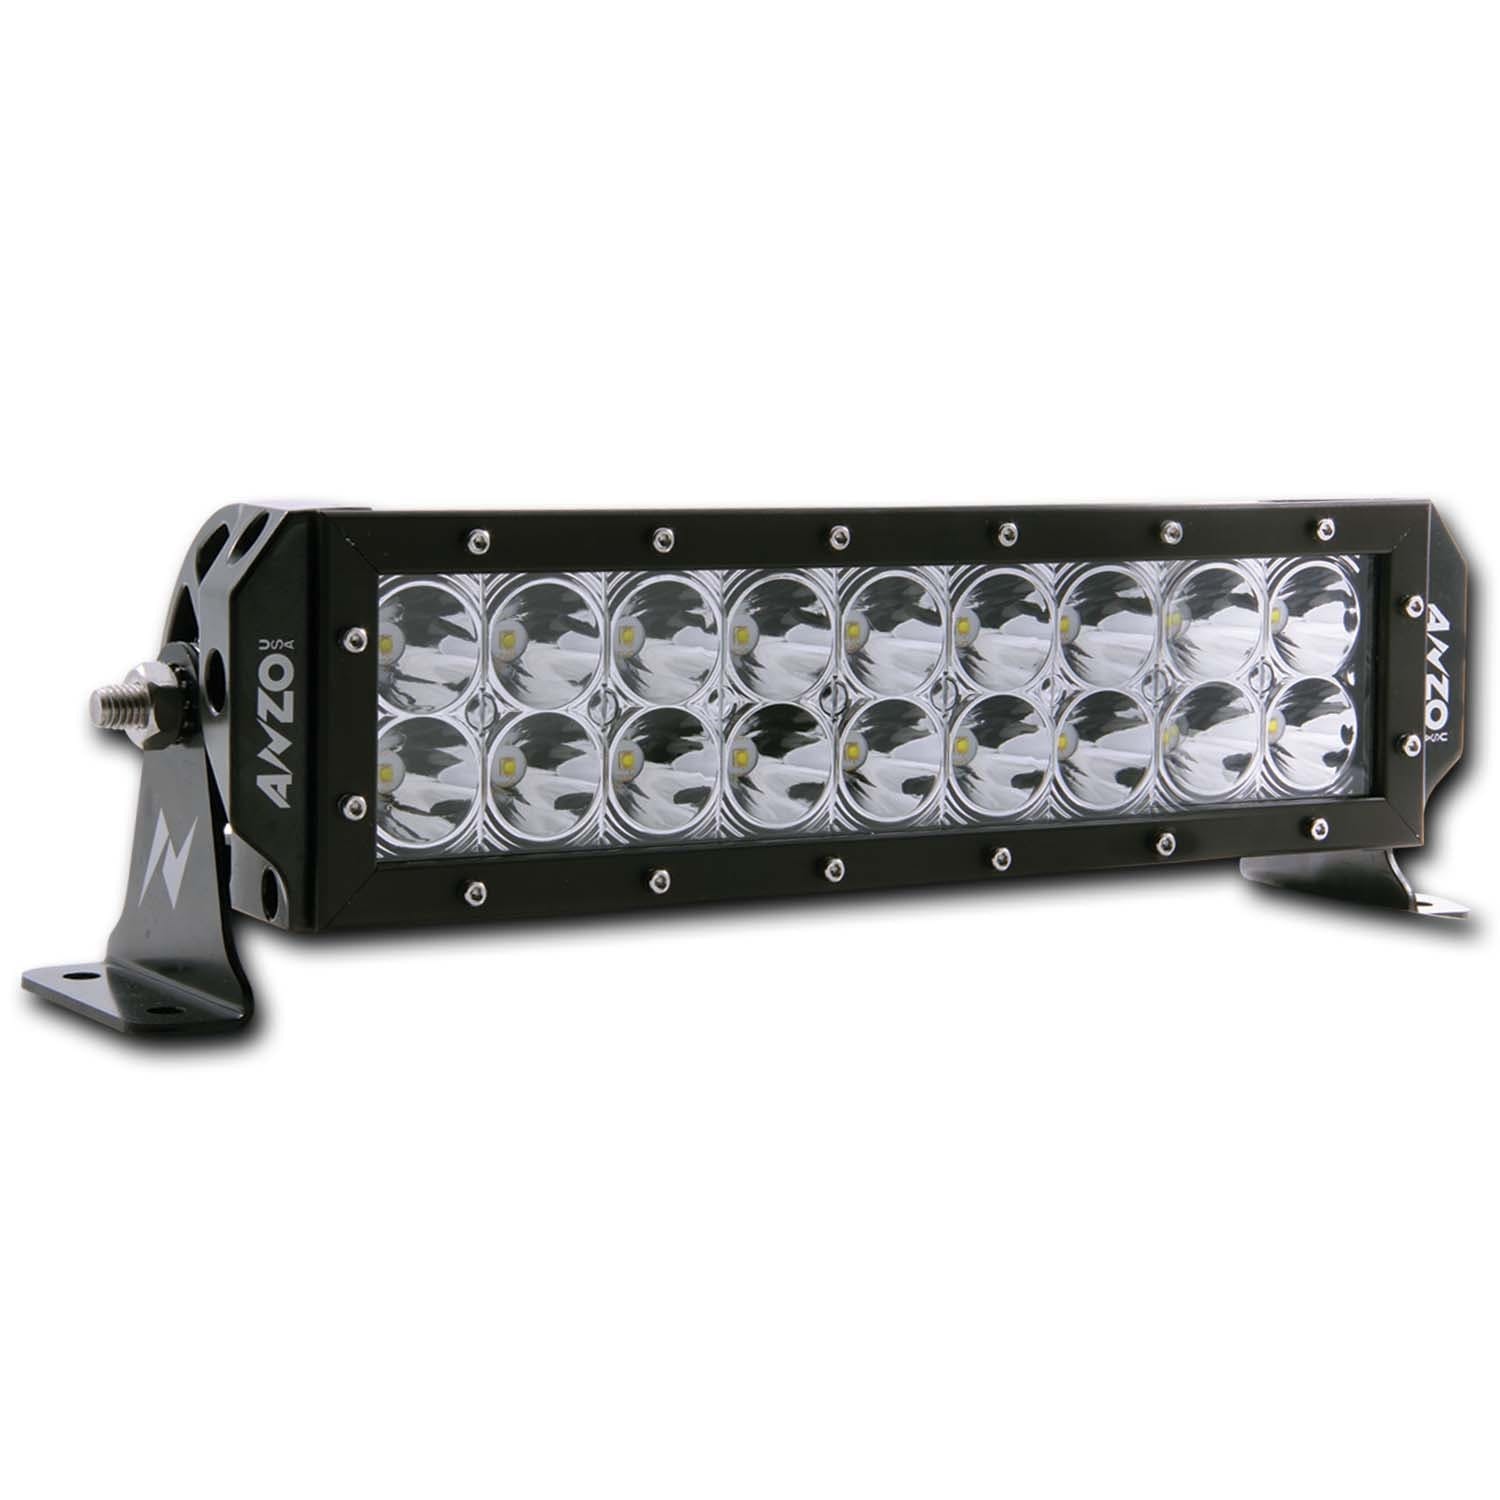 AnzoUSA 881026 Rugged Off Road Light 12" 3W High Intensity LED (Spot)